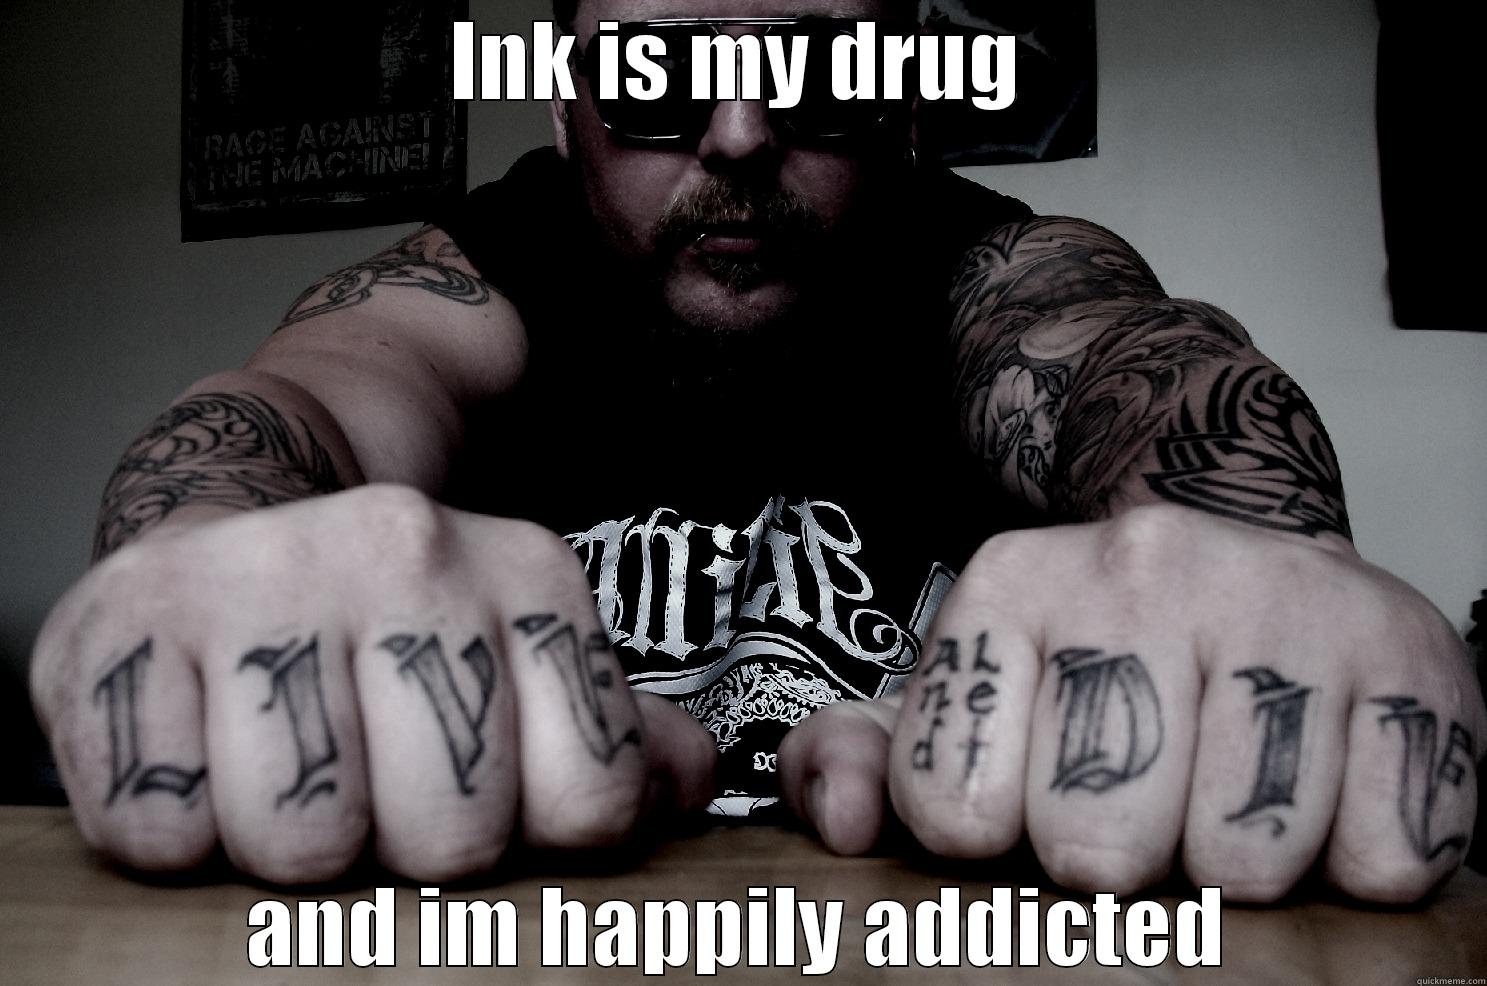 Ink addiction - INK IS MY DRUG AND IM HAPPILY ADDICTED Misc